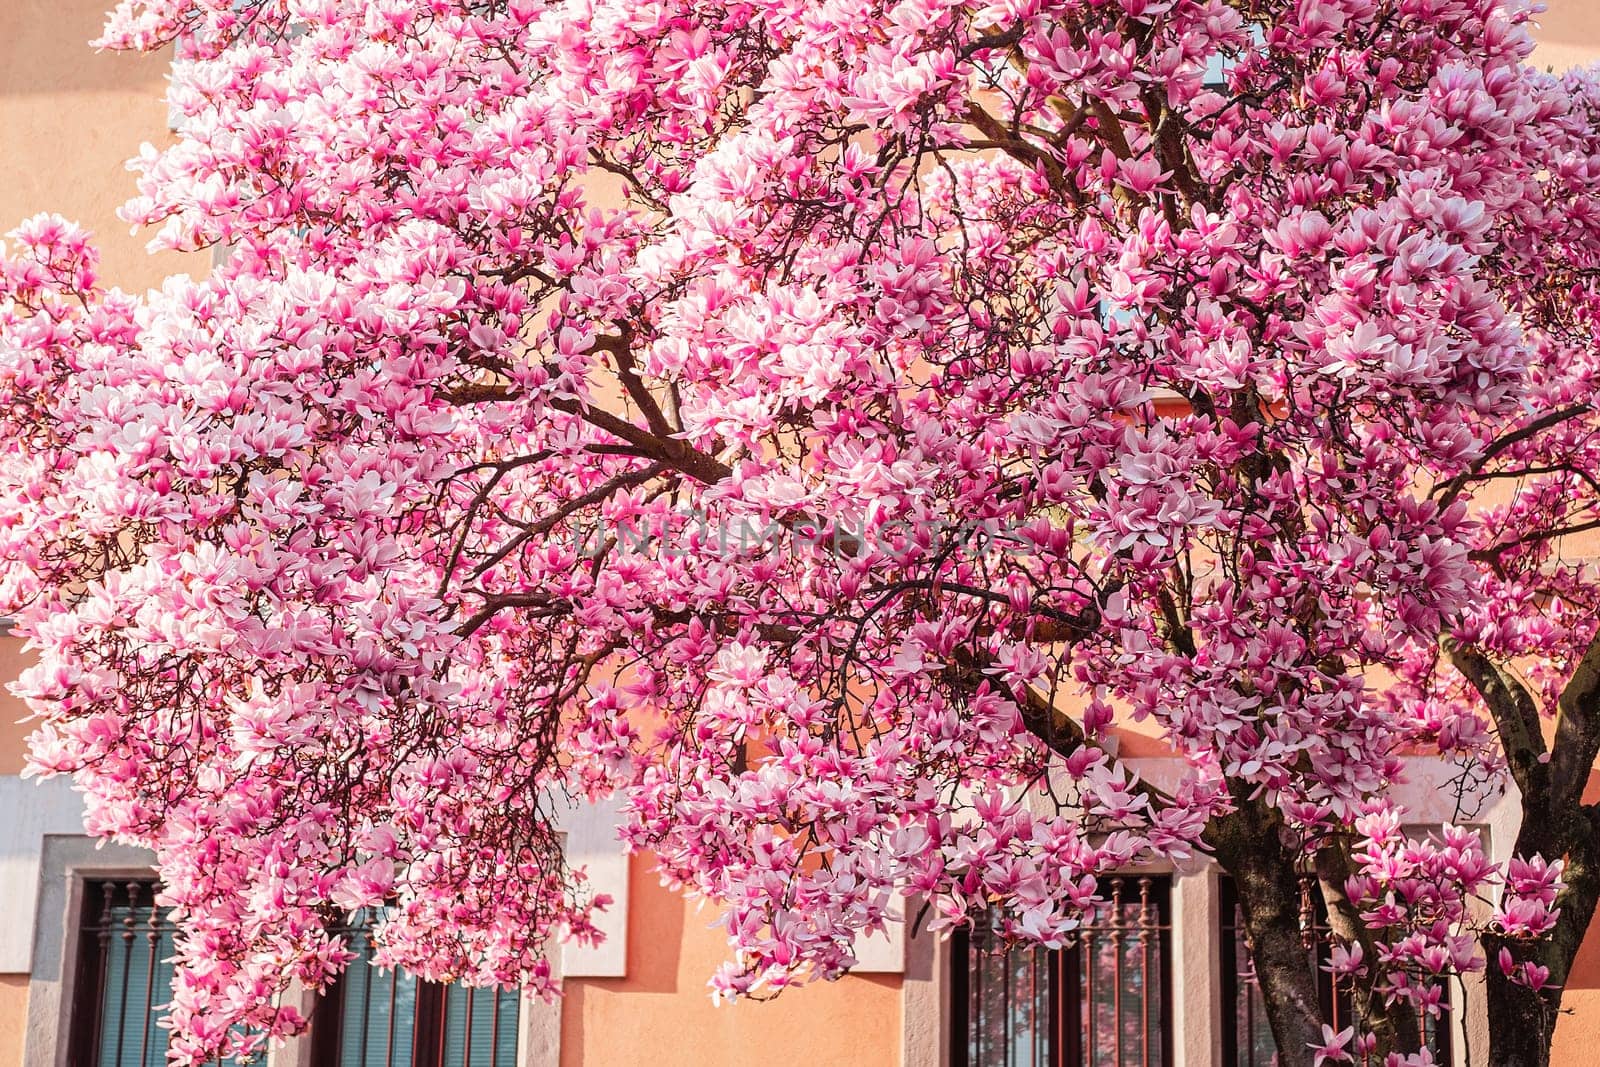 Blooming full magnolia tree in spring in the city.